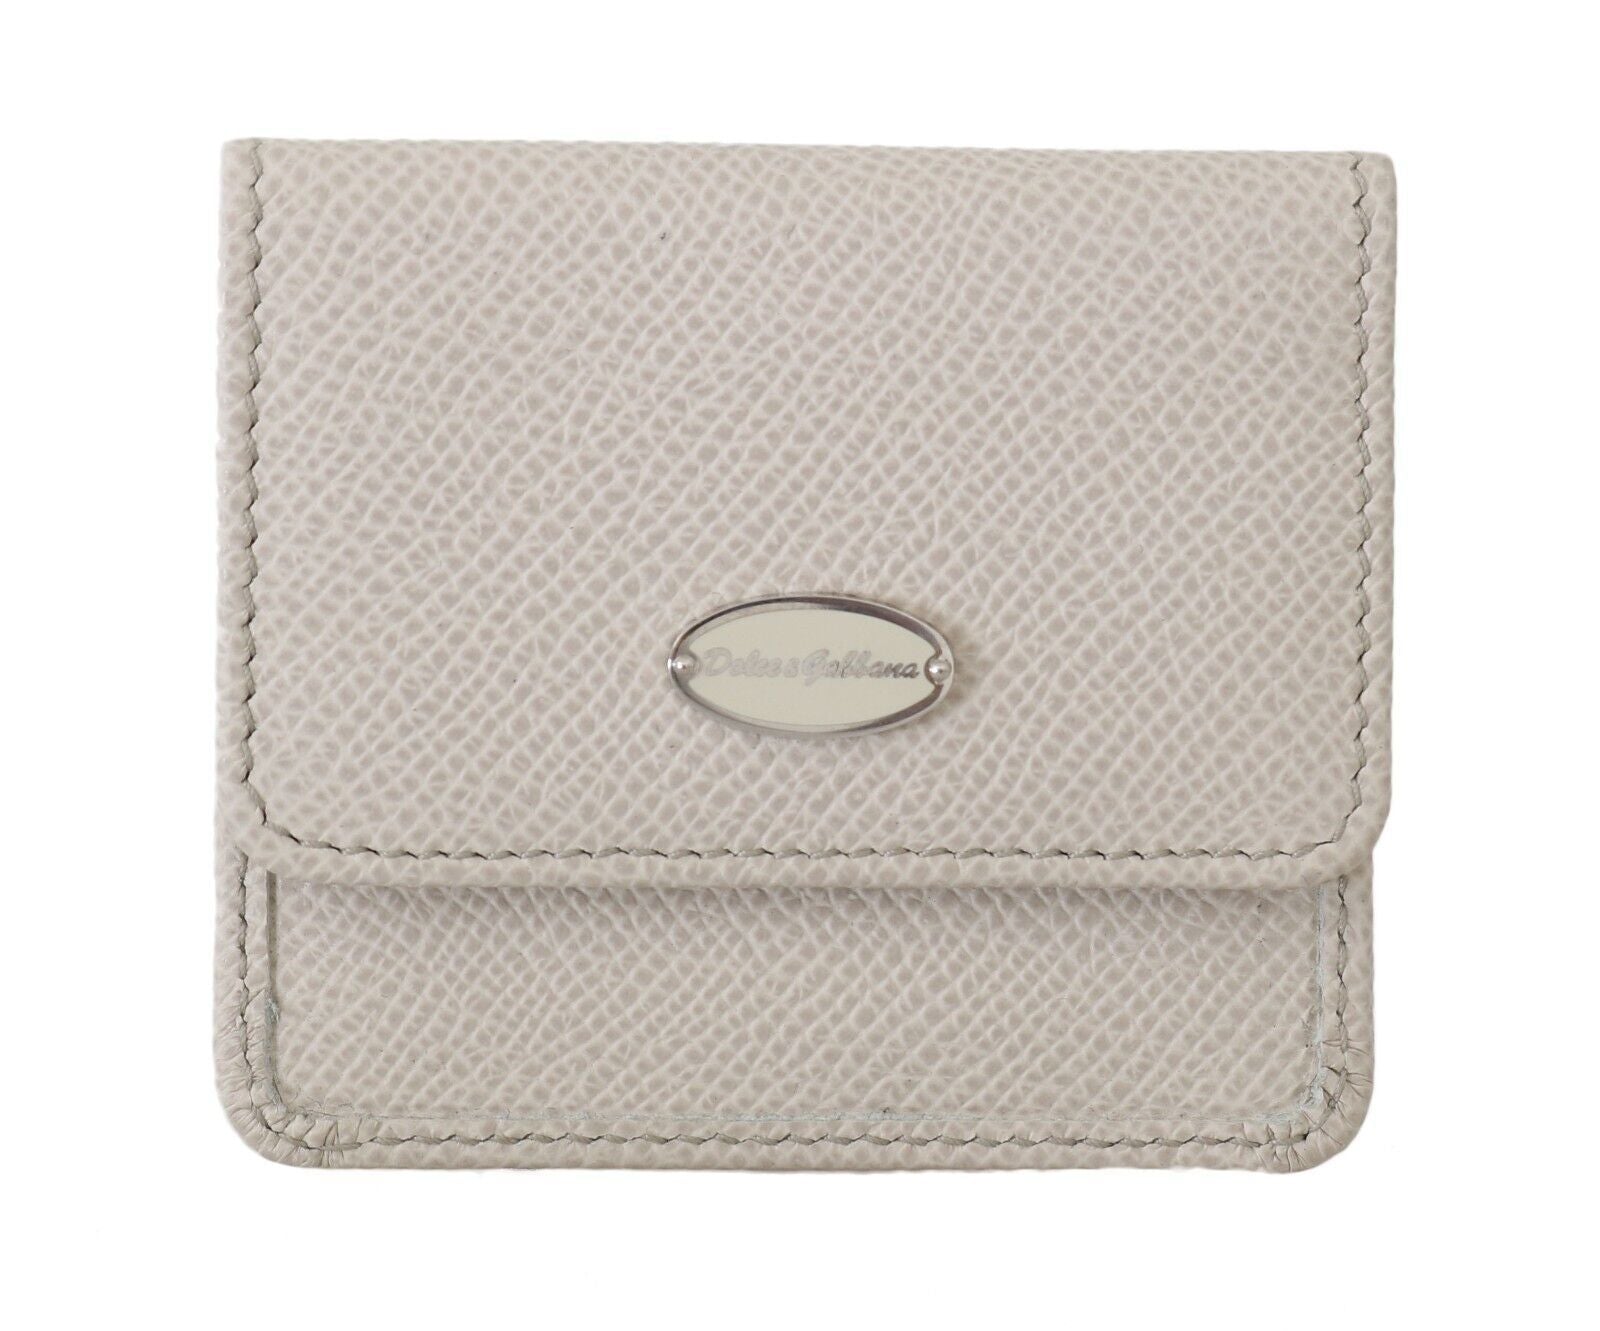 Chic White Leather Condom Case Wallet